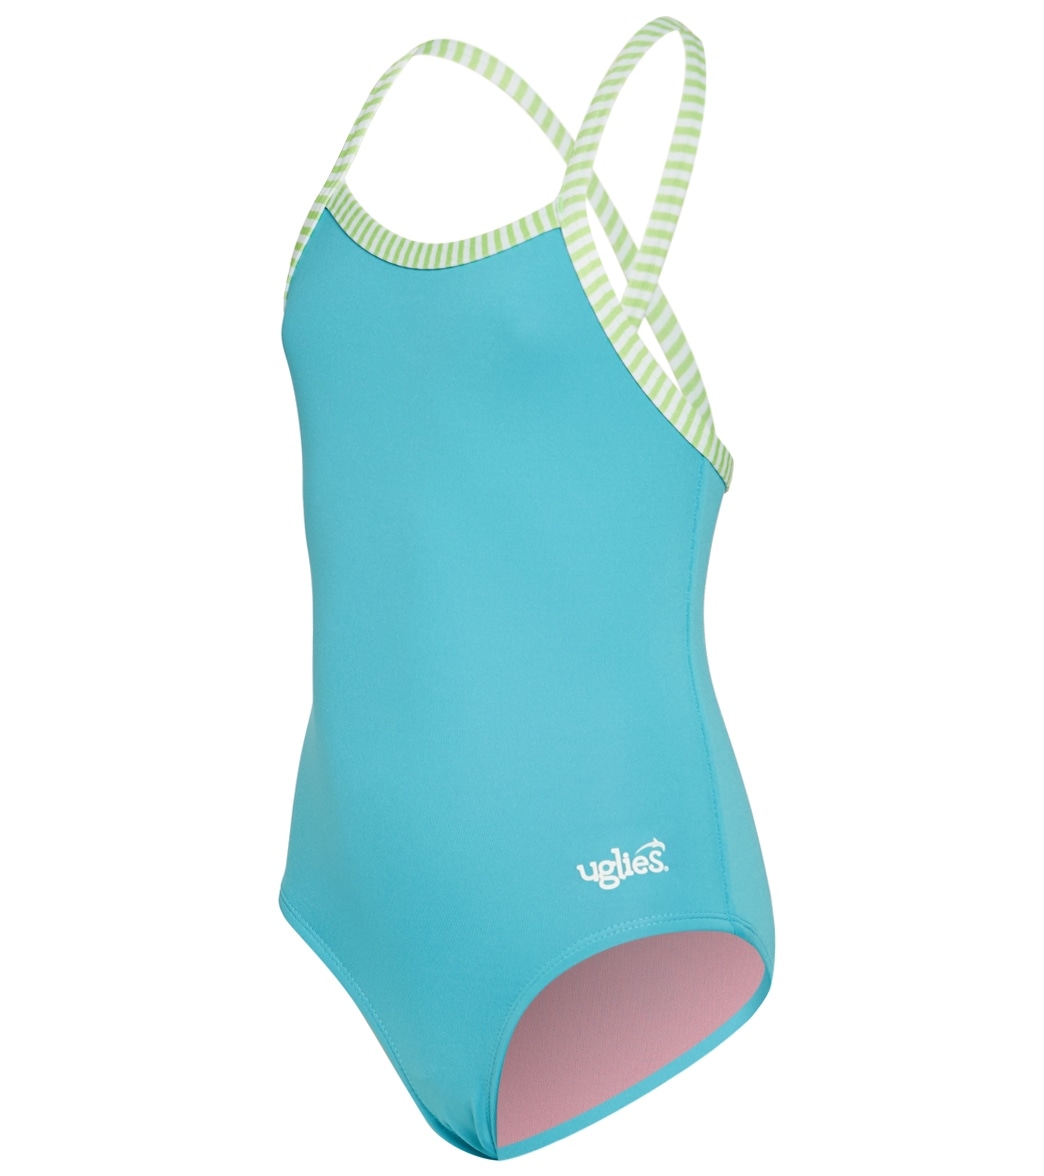 Dolfin Uglies Girls' Solid One Piece Swimsuit - Turquoise 14 Polyester/Spandex - Swimoutlet.com